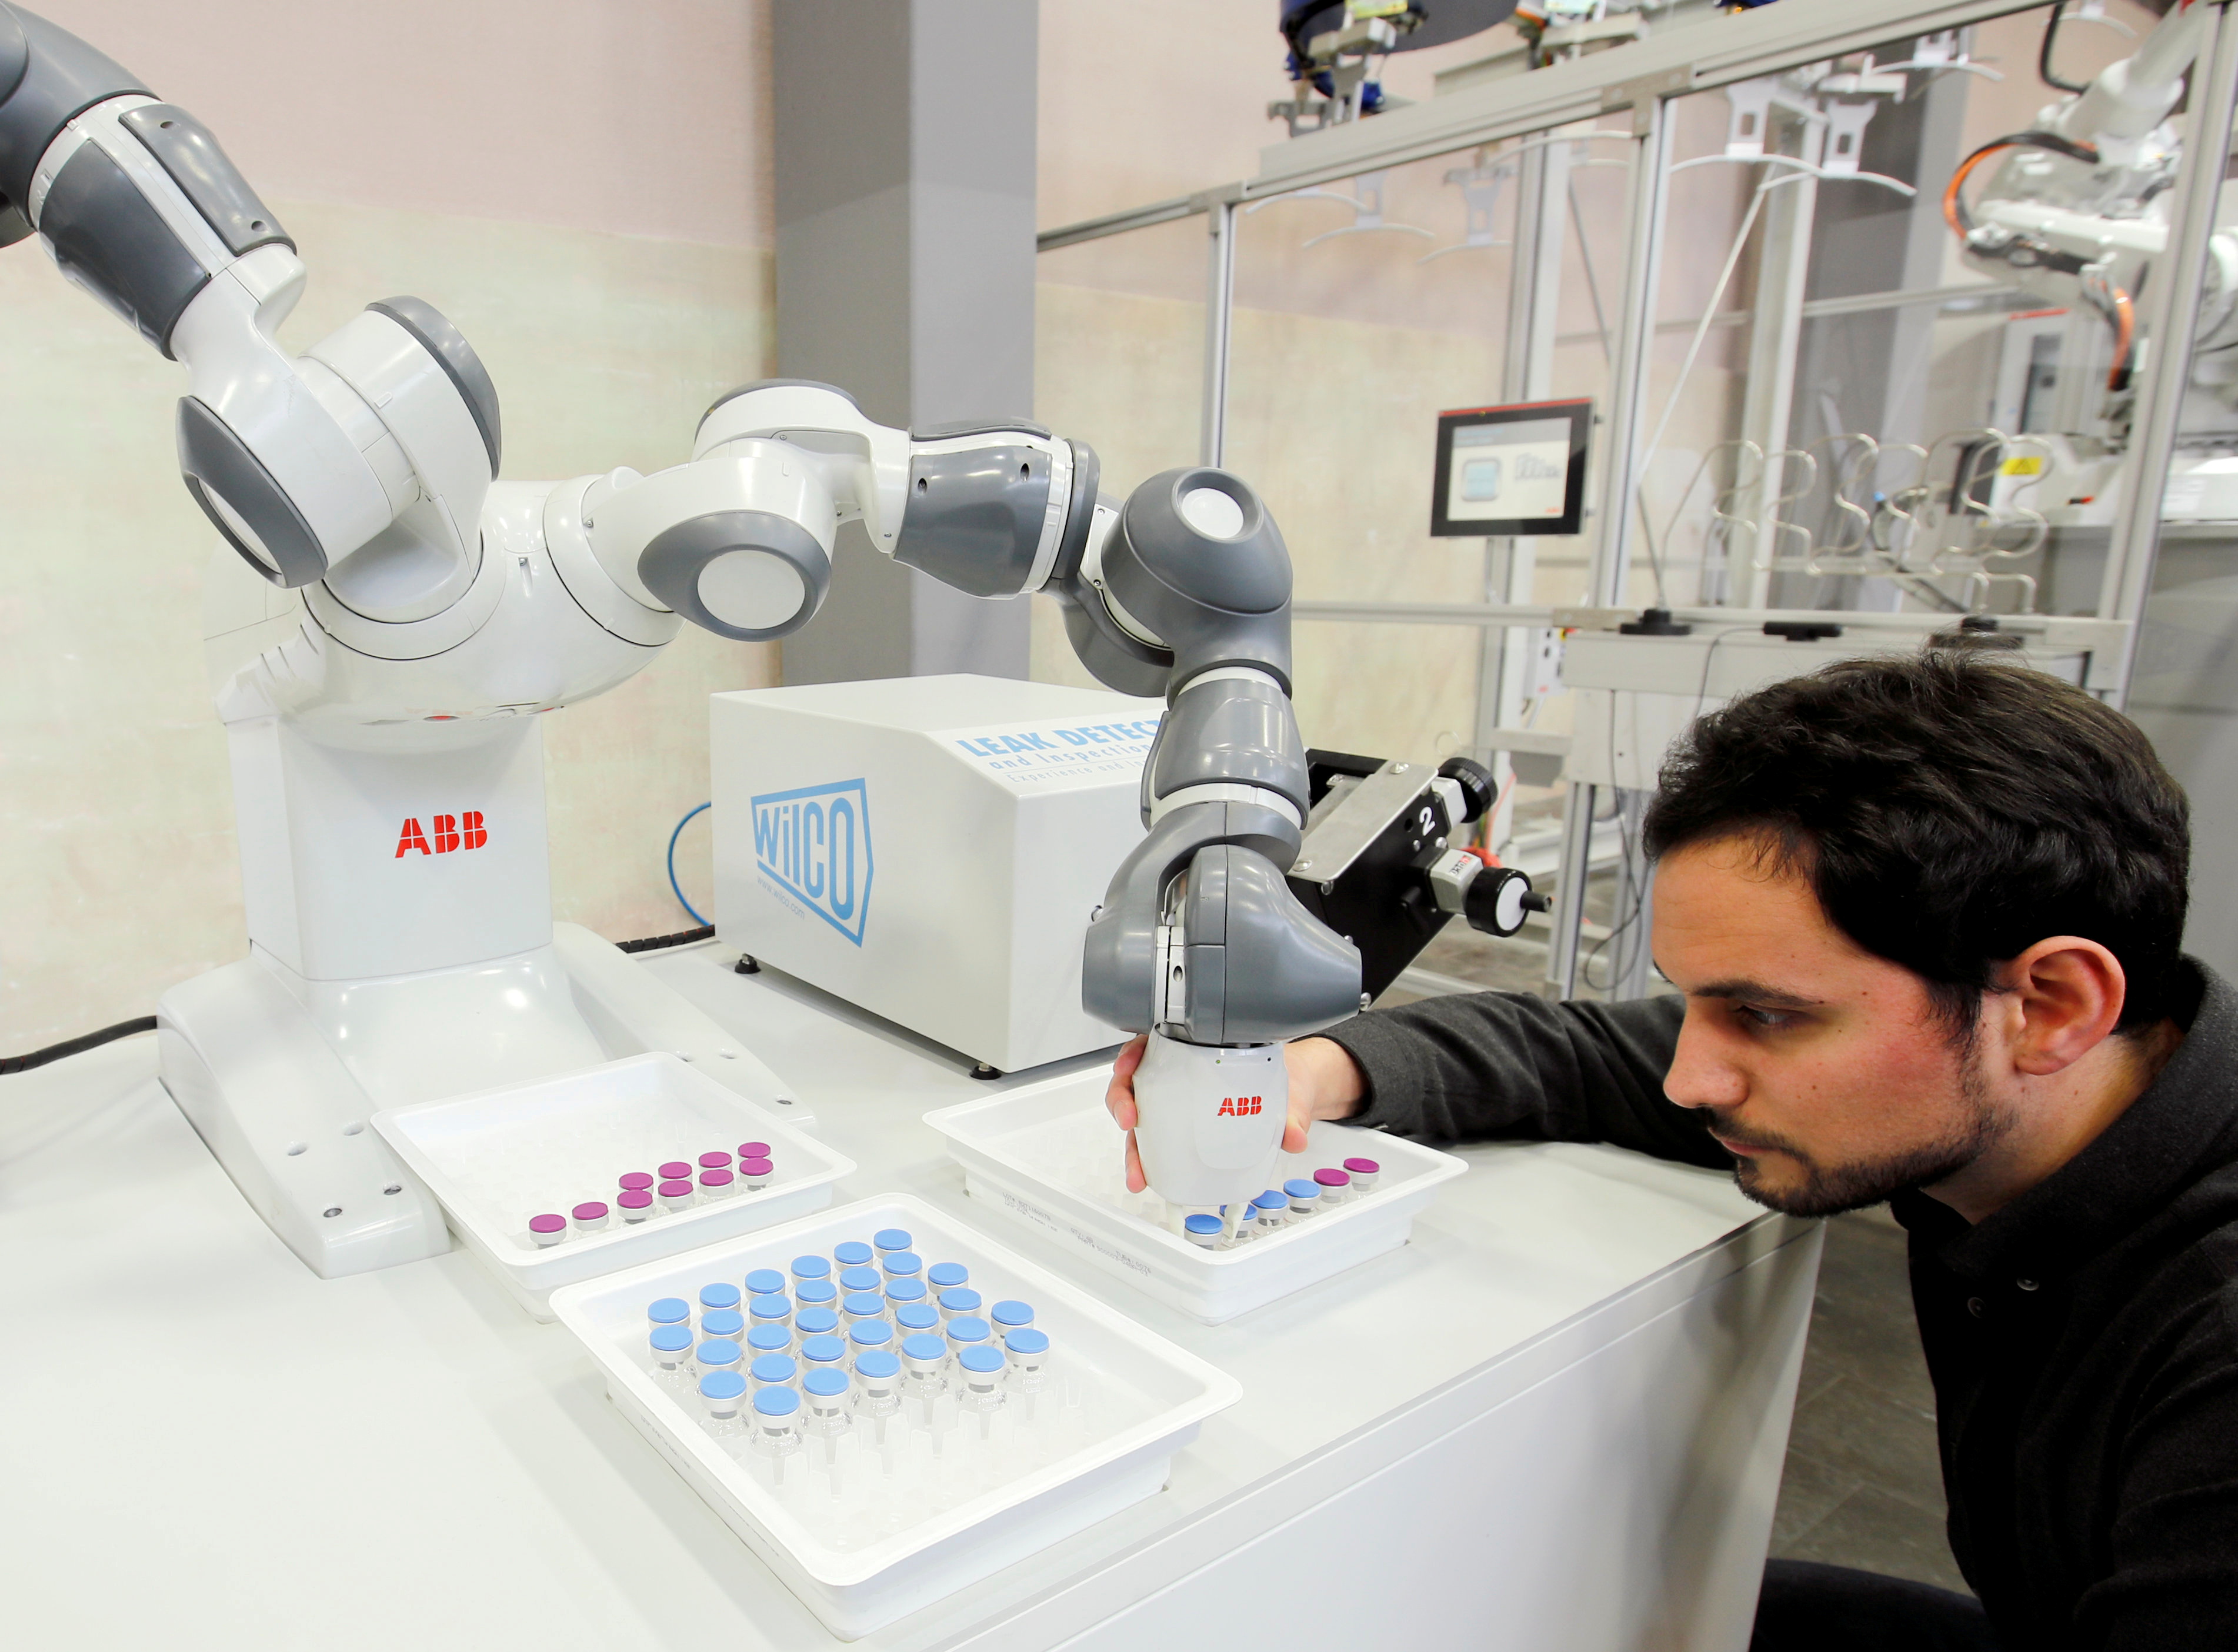 Engineer Trilla of ABB adjusts an arm of a YuMi - IRB14000 robot in Baden